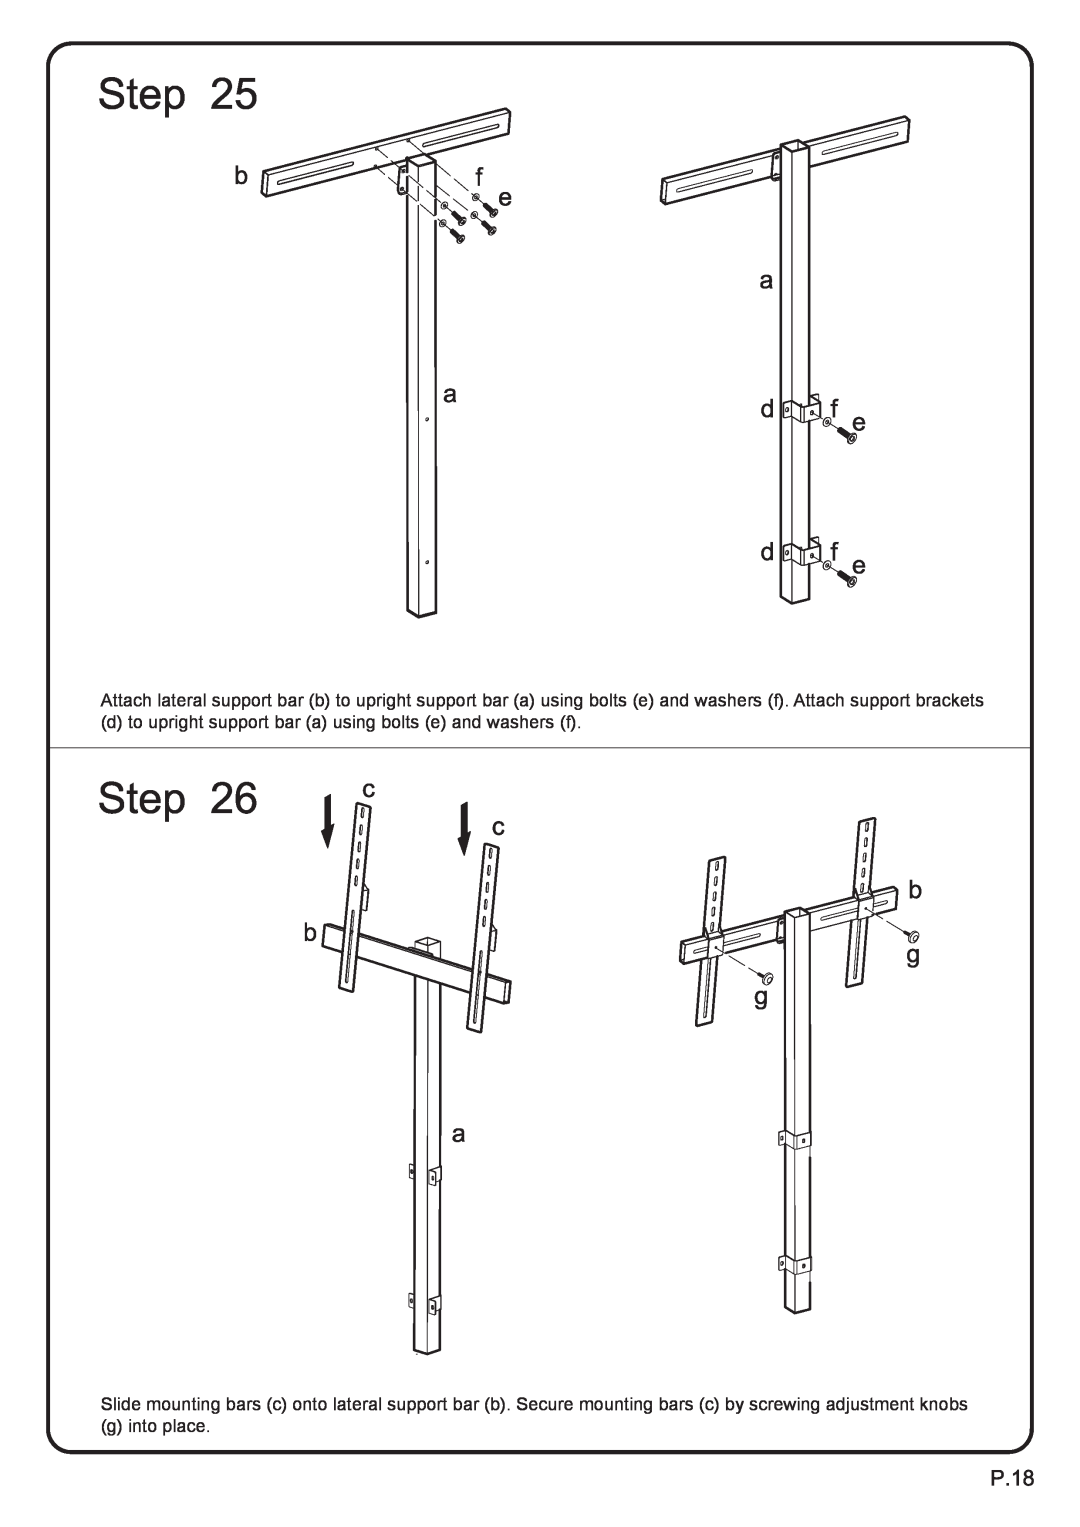 Walker P42C77BL-MT manual d to upright support bar a using bolts e and washers f, g into place 